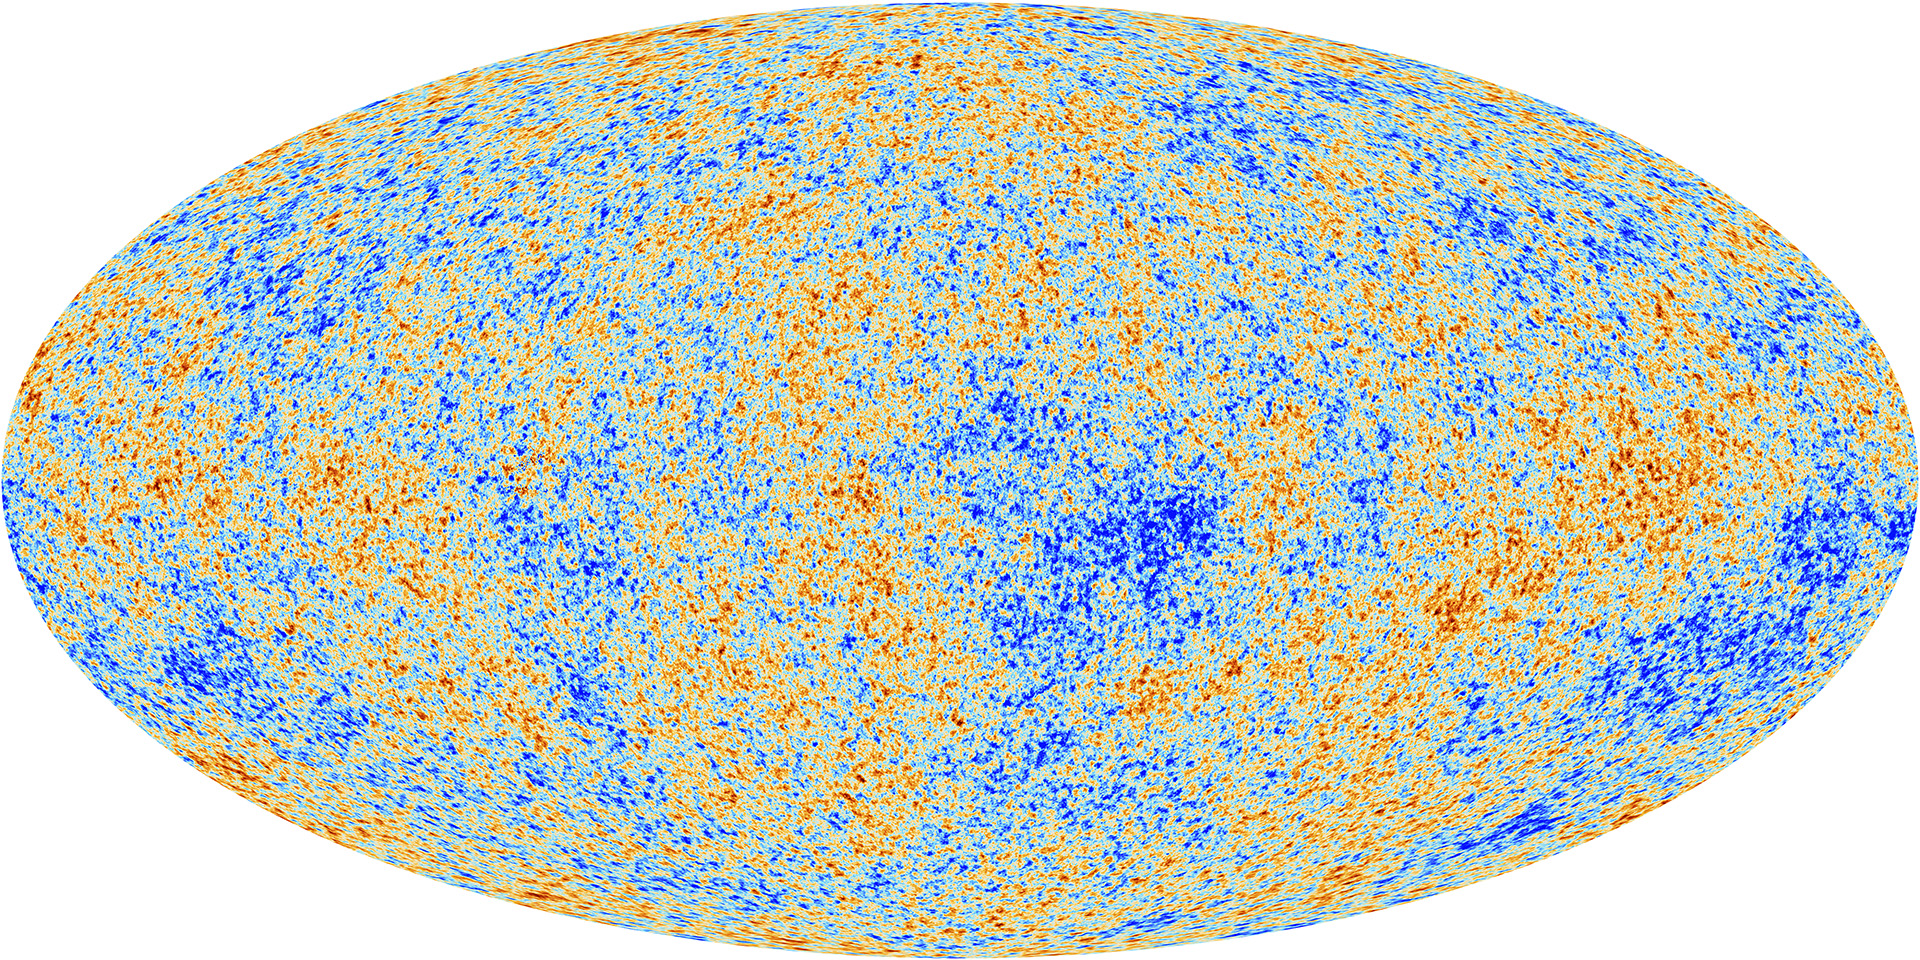 image of the cosmic microwave background radiation showing colourful dots (mostly blu, orange, yellow, red)